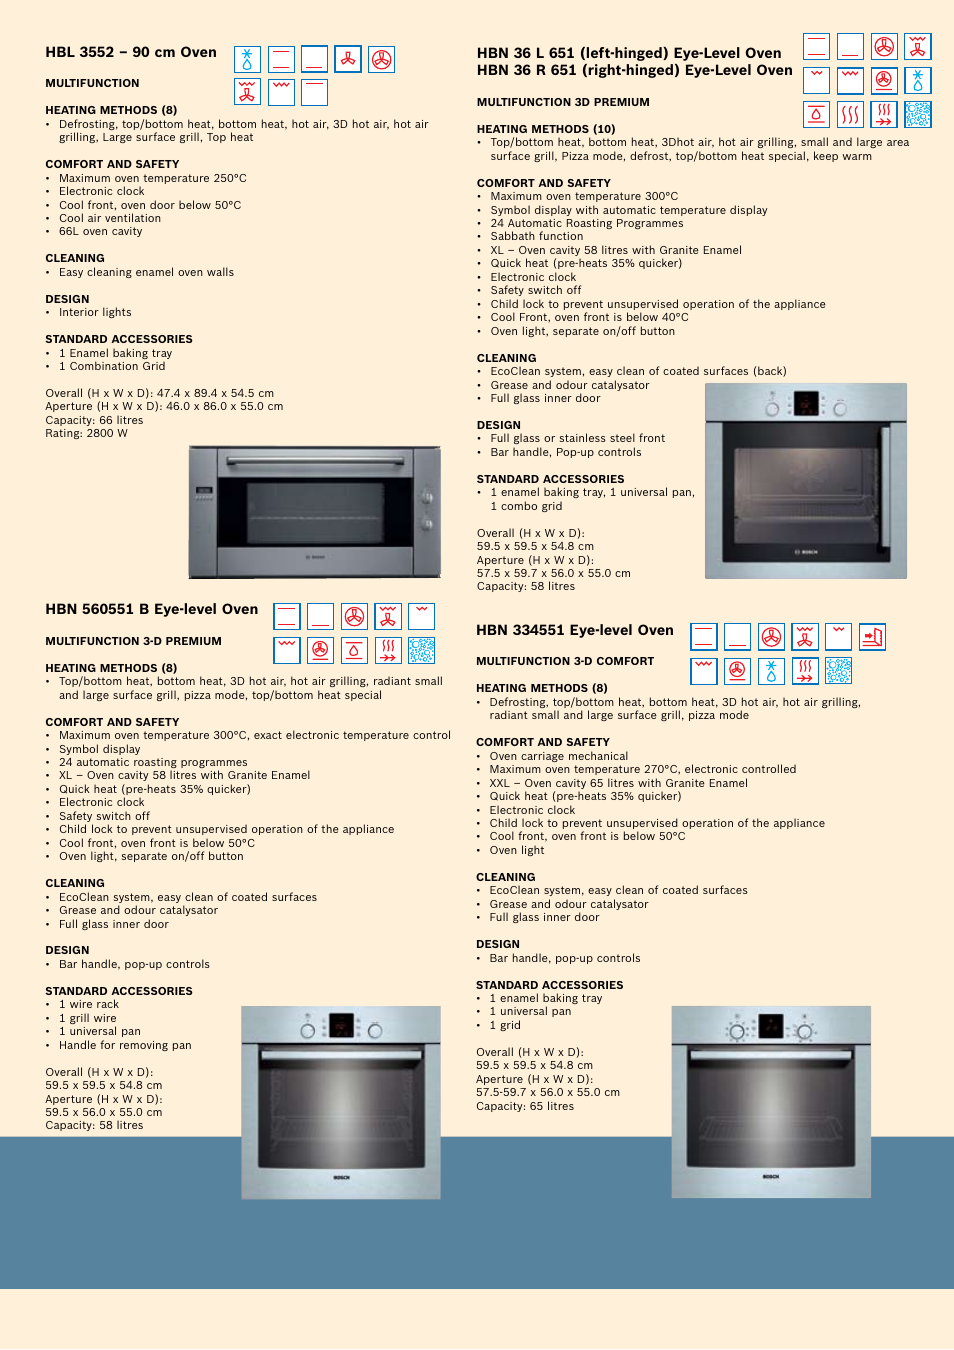 Bosch Oven Carriage User Manual | Page 5 / 28 | Original mode